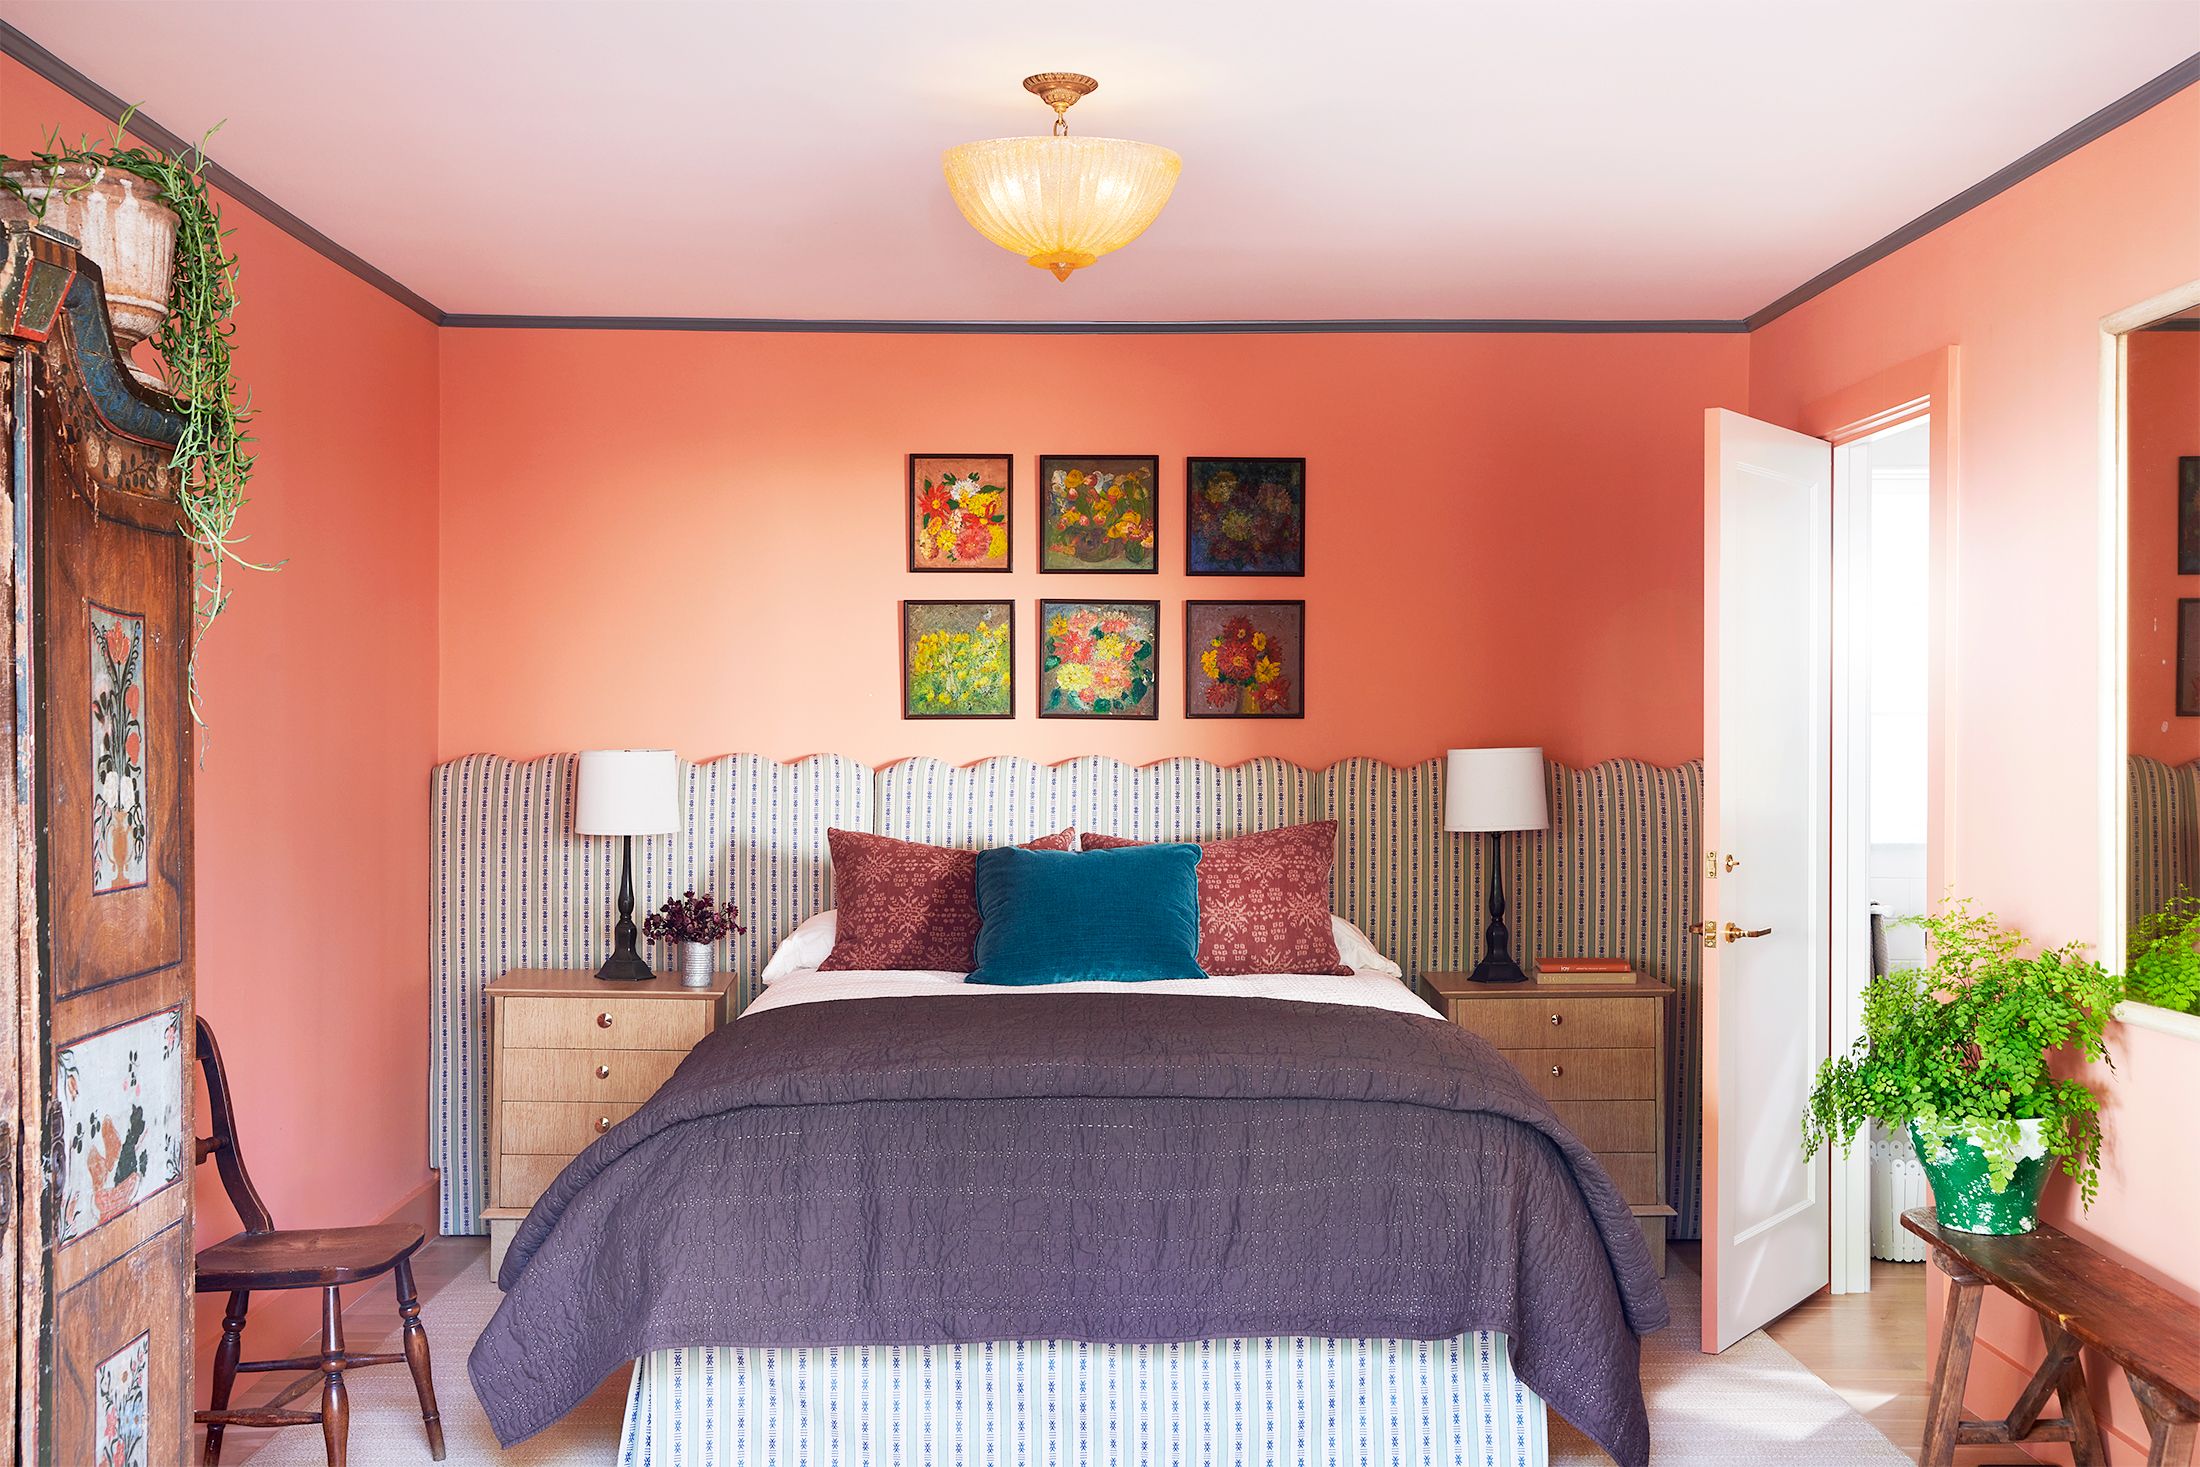 Choosing the Right Colors for Every Room